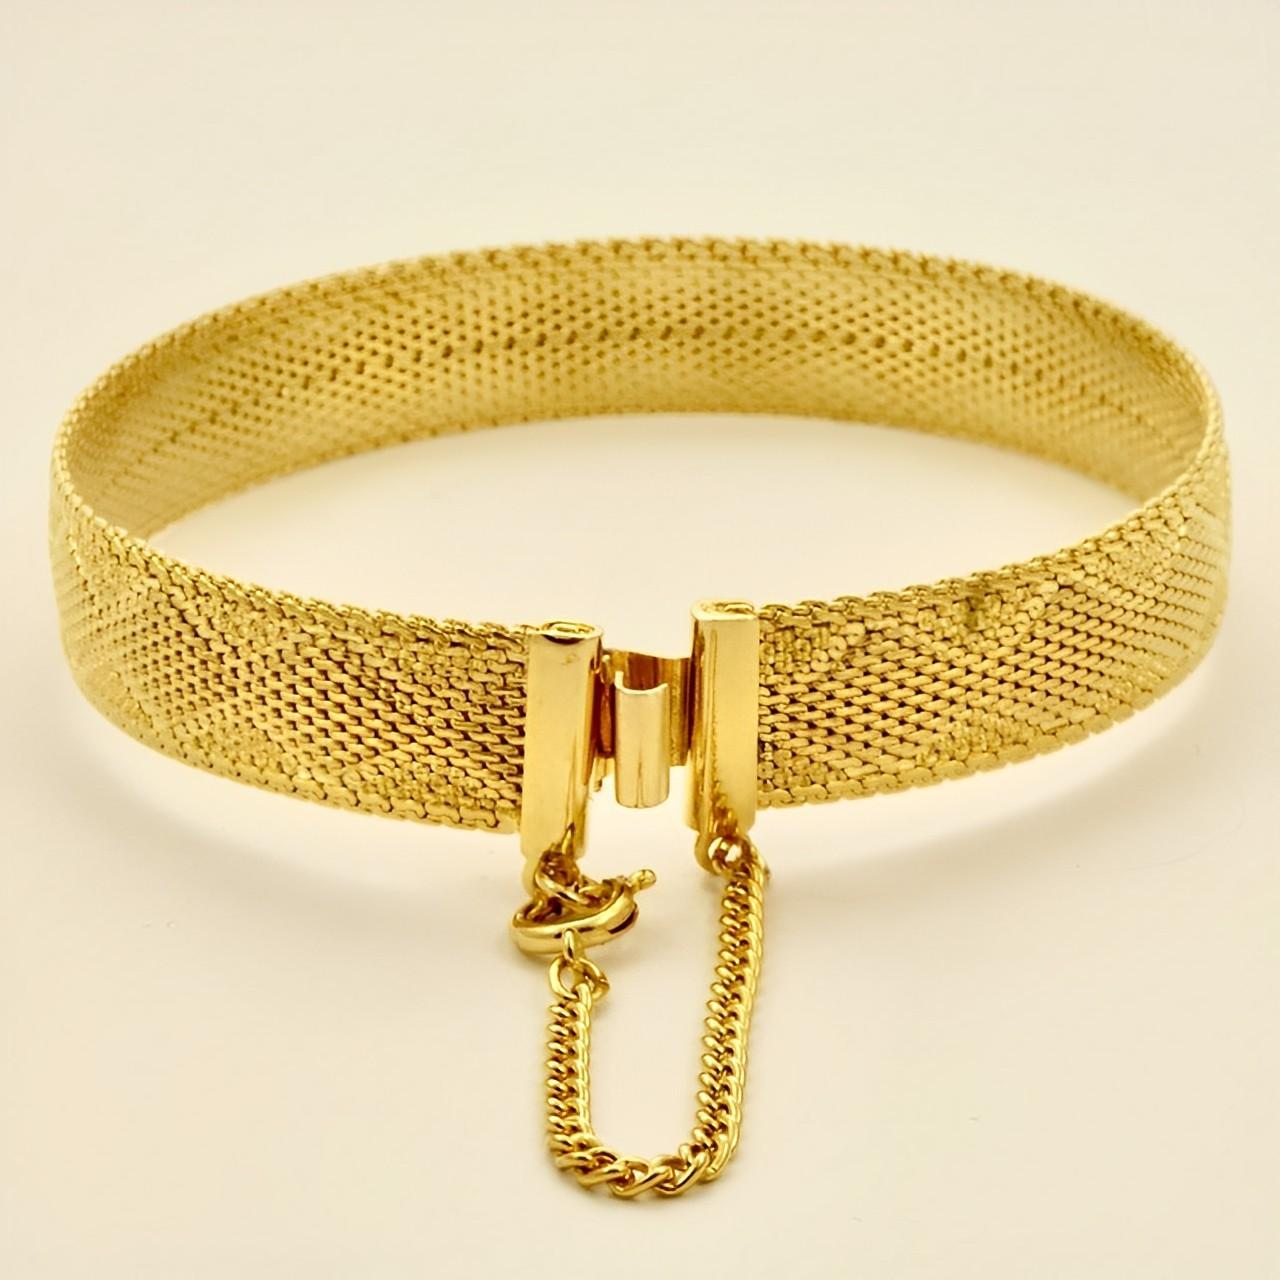 Beautiful gold plated Egyptian Revival mesh bracelet, featuring a lovely diamond design, and safety chain. Measuring length approximately 18.2 cm / 7.1 inches by width 1.05 cm / .4 inch. The bracelet is in very good condition.

This stylish bracelet